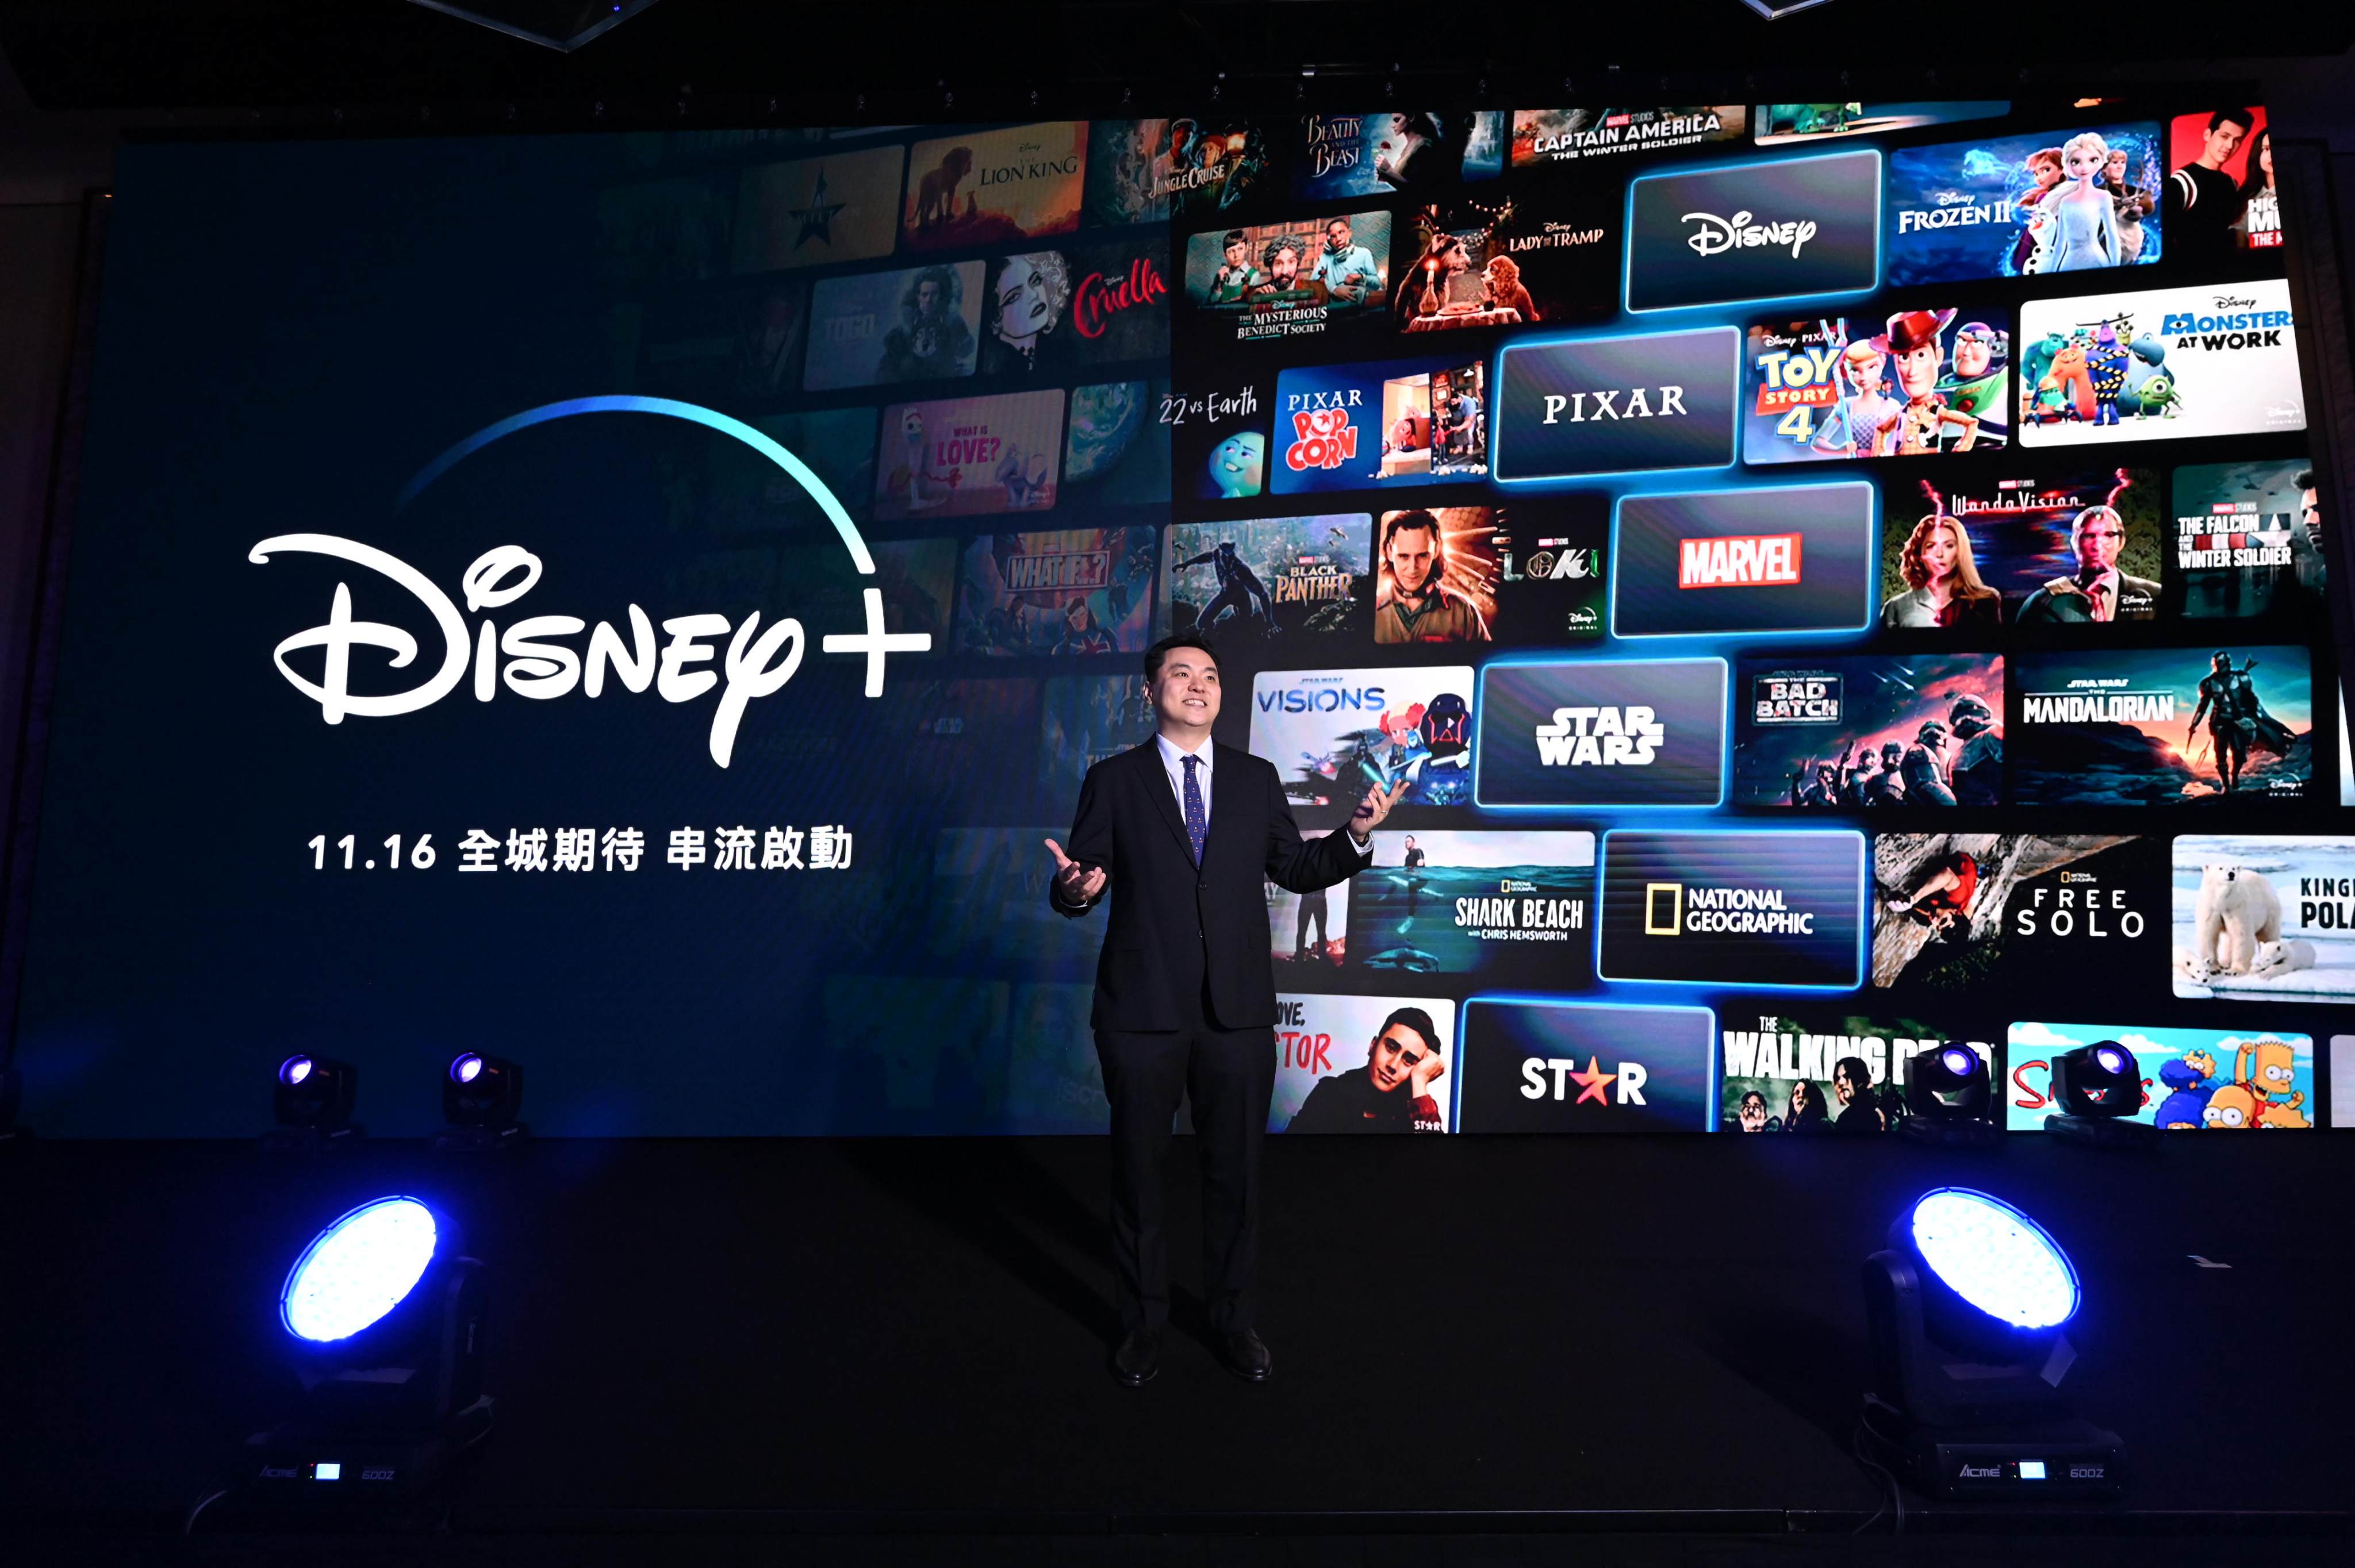 Disney+ launched mere months before the pandemic locked down most of the world, and will finally launch in Hong Kong in November, 2021.